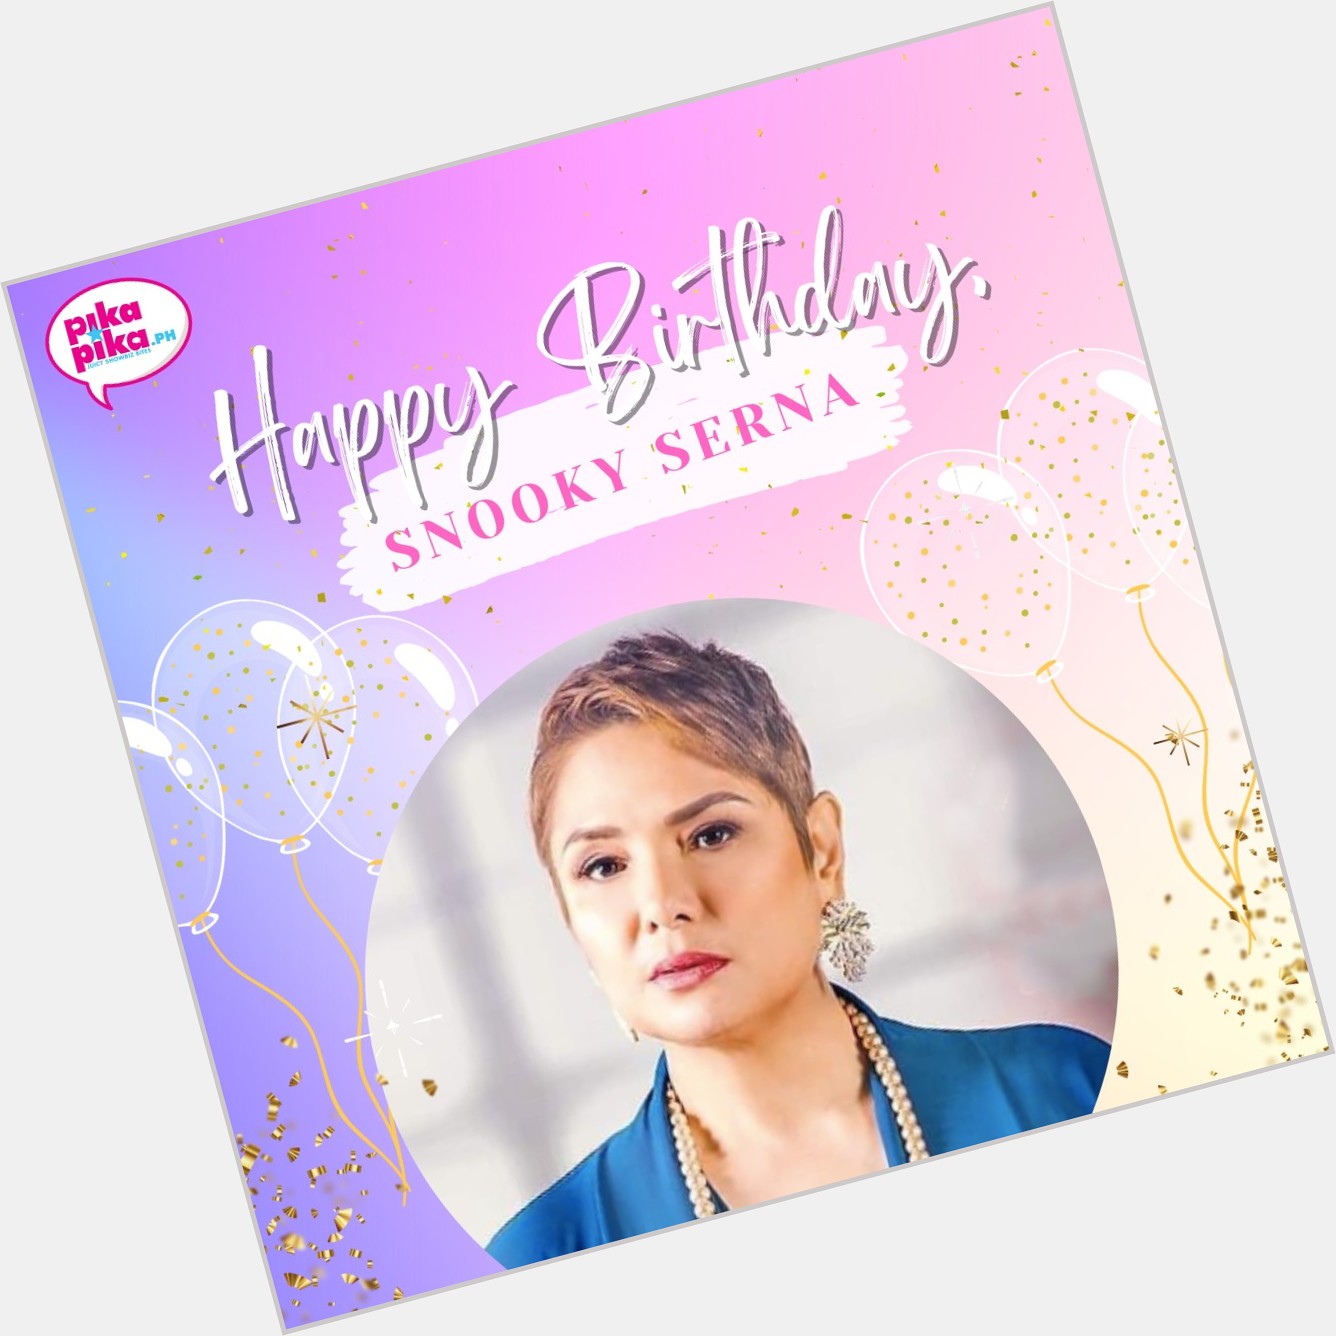 Happy birthday, Snooky Serna! May your special day be filled with love and cheers.    